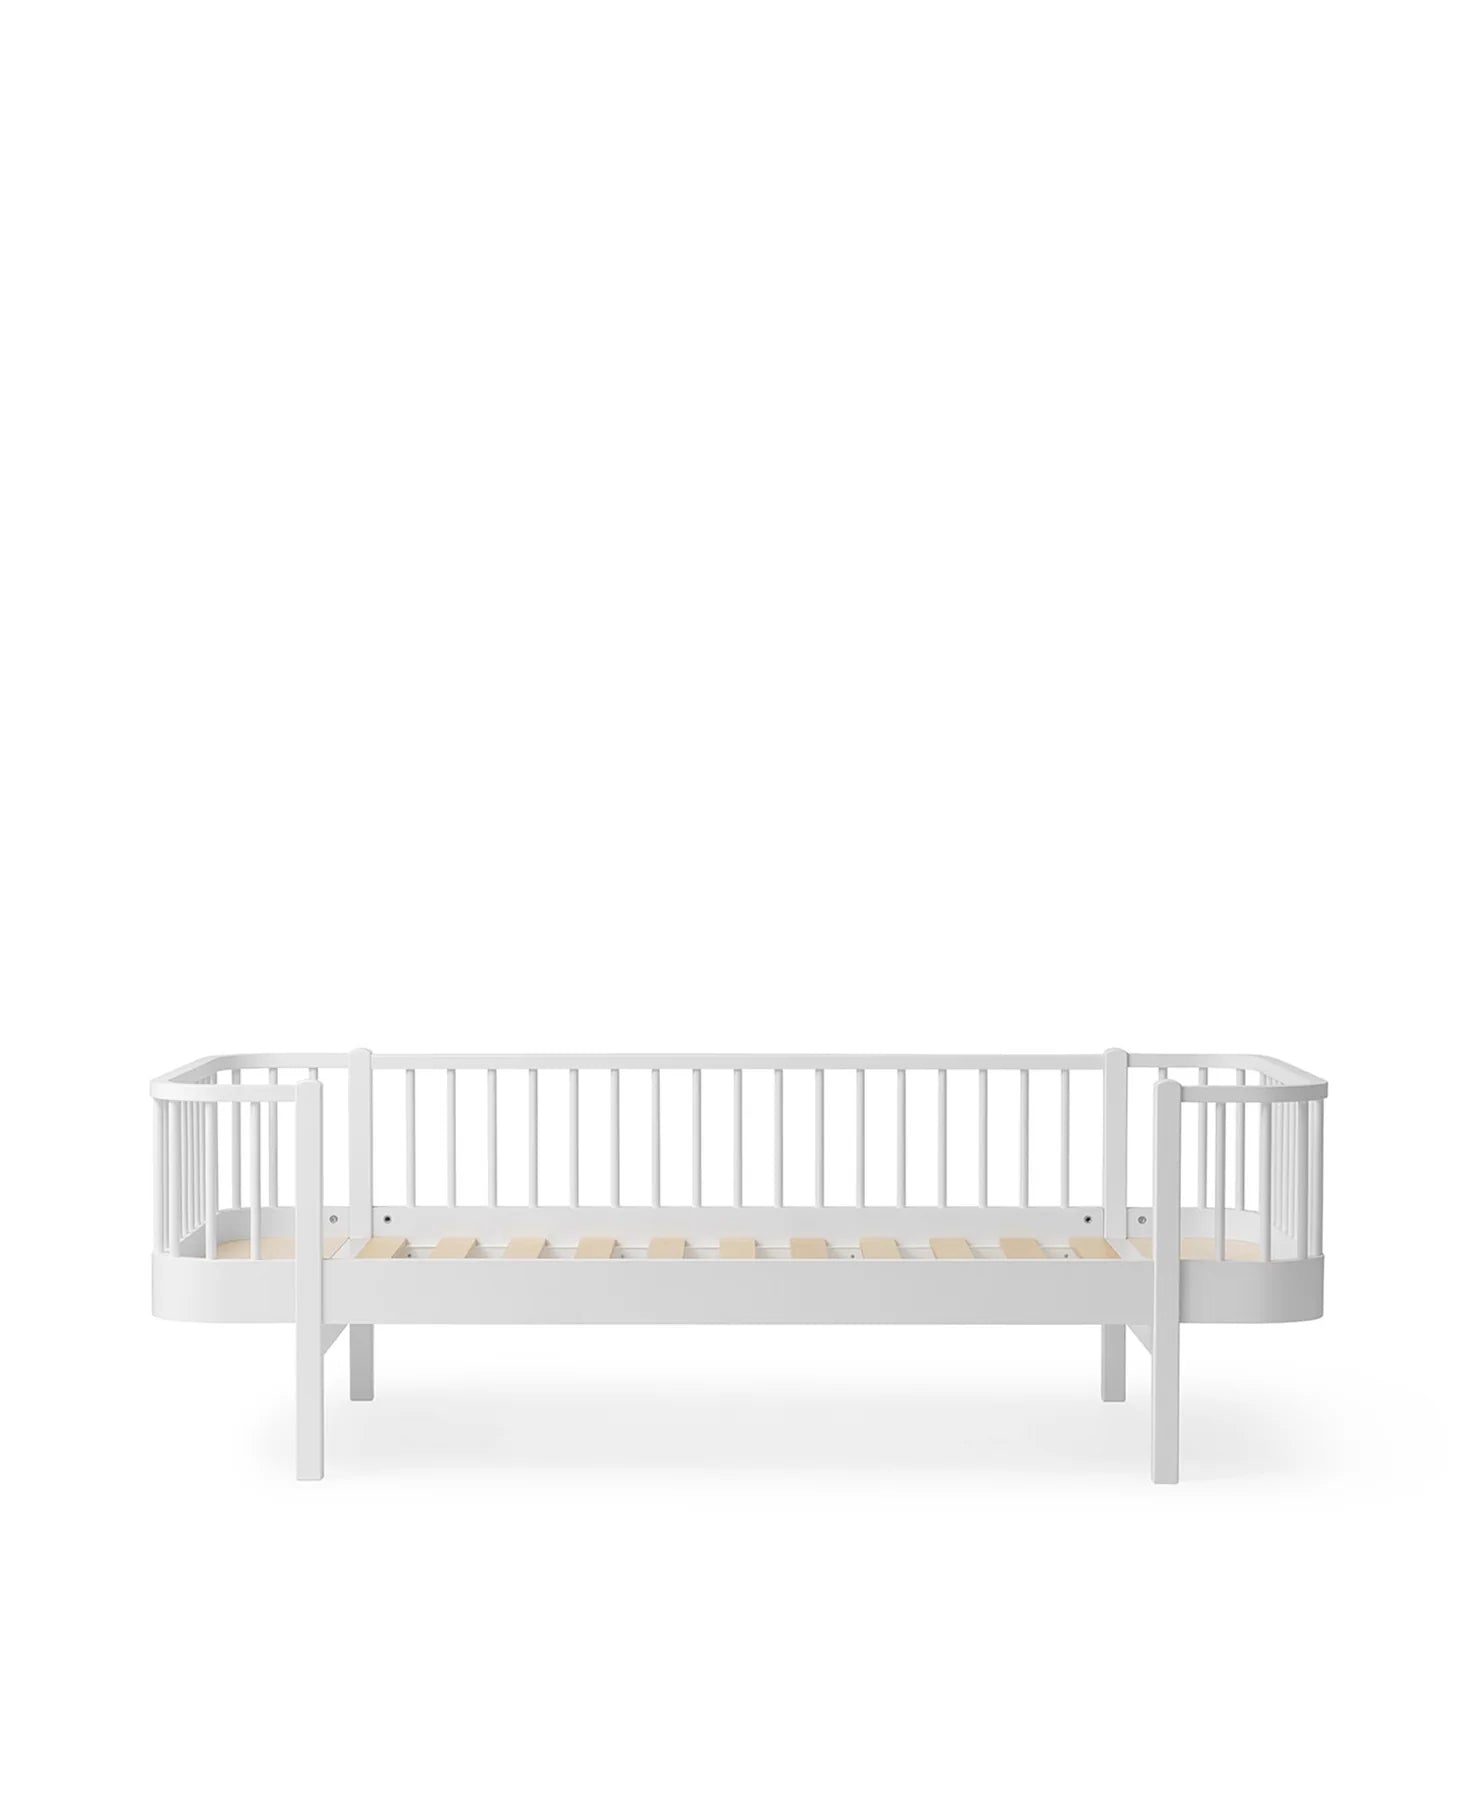 Oliver Furniture - Wood Bettsofa in weiss 90x200